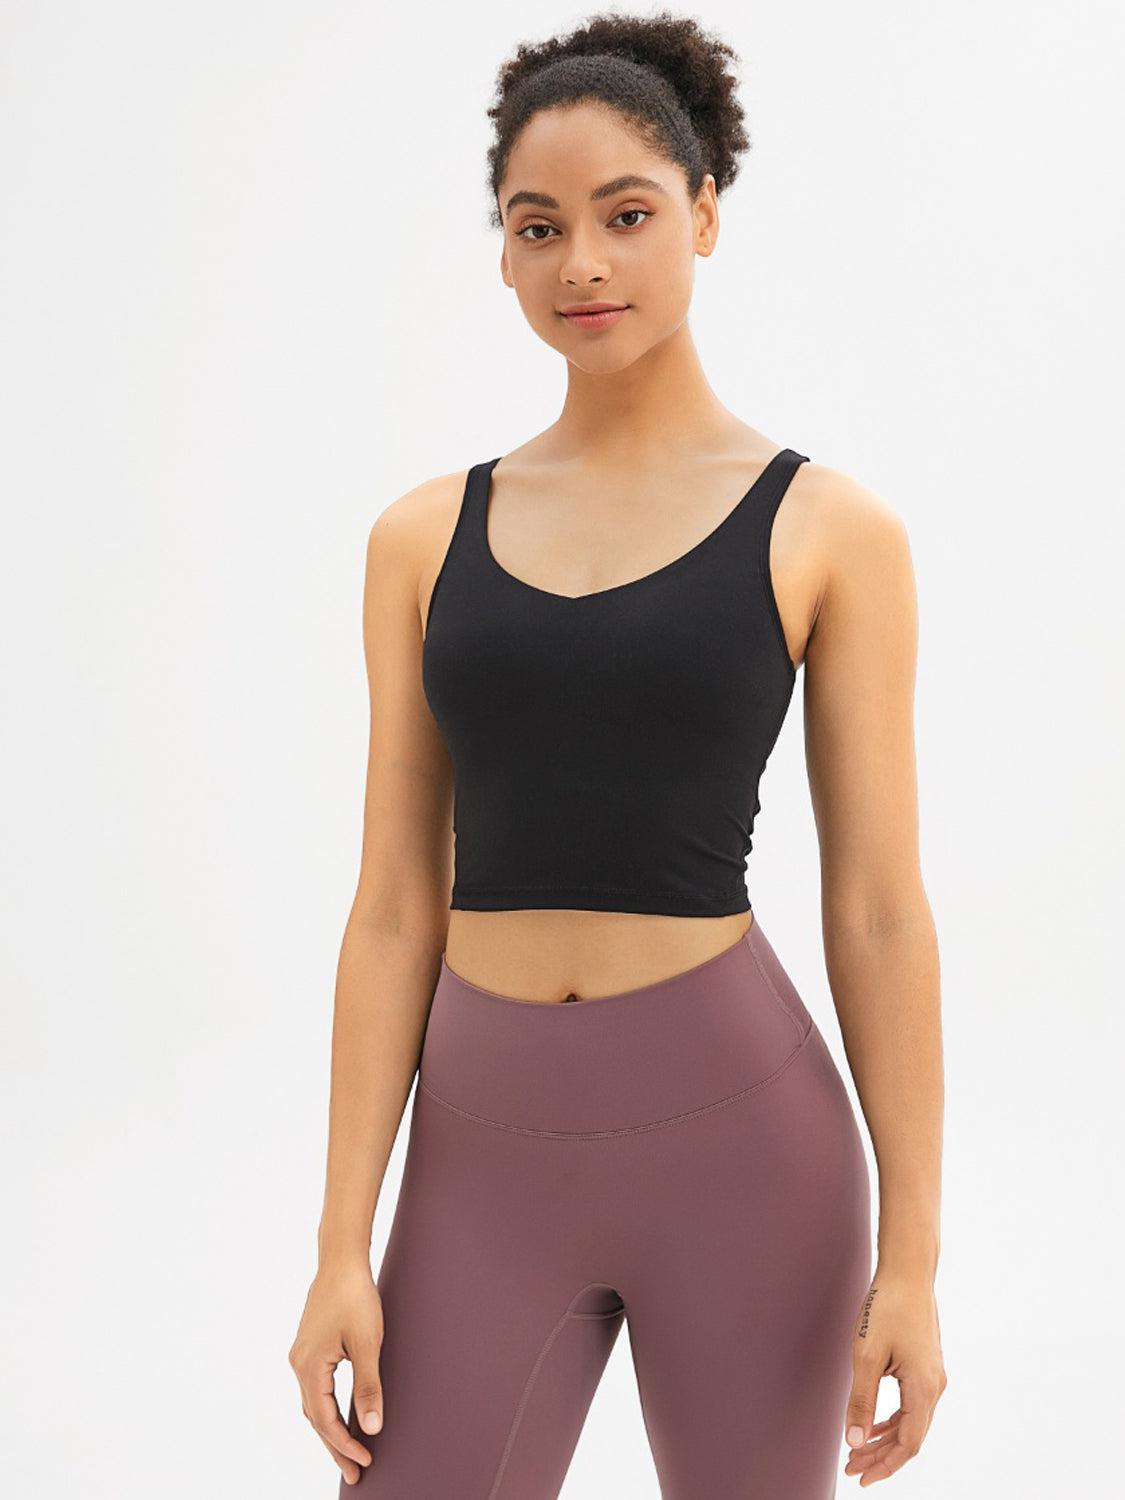 a woman in a black top and purple leggings